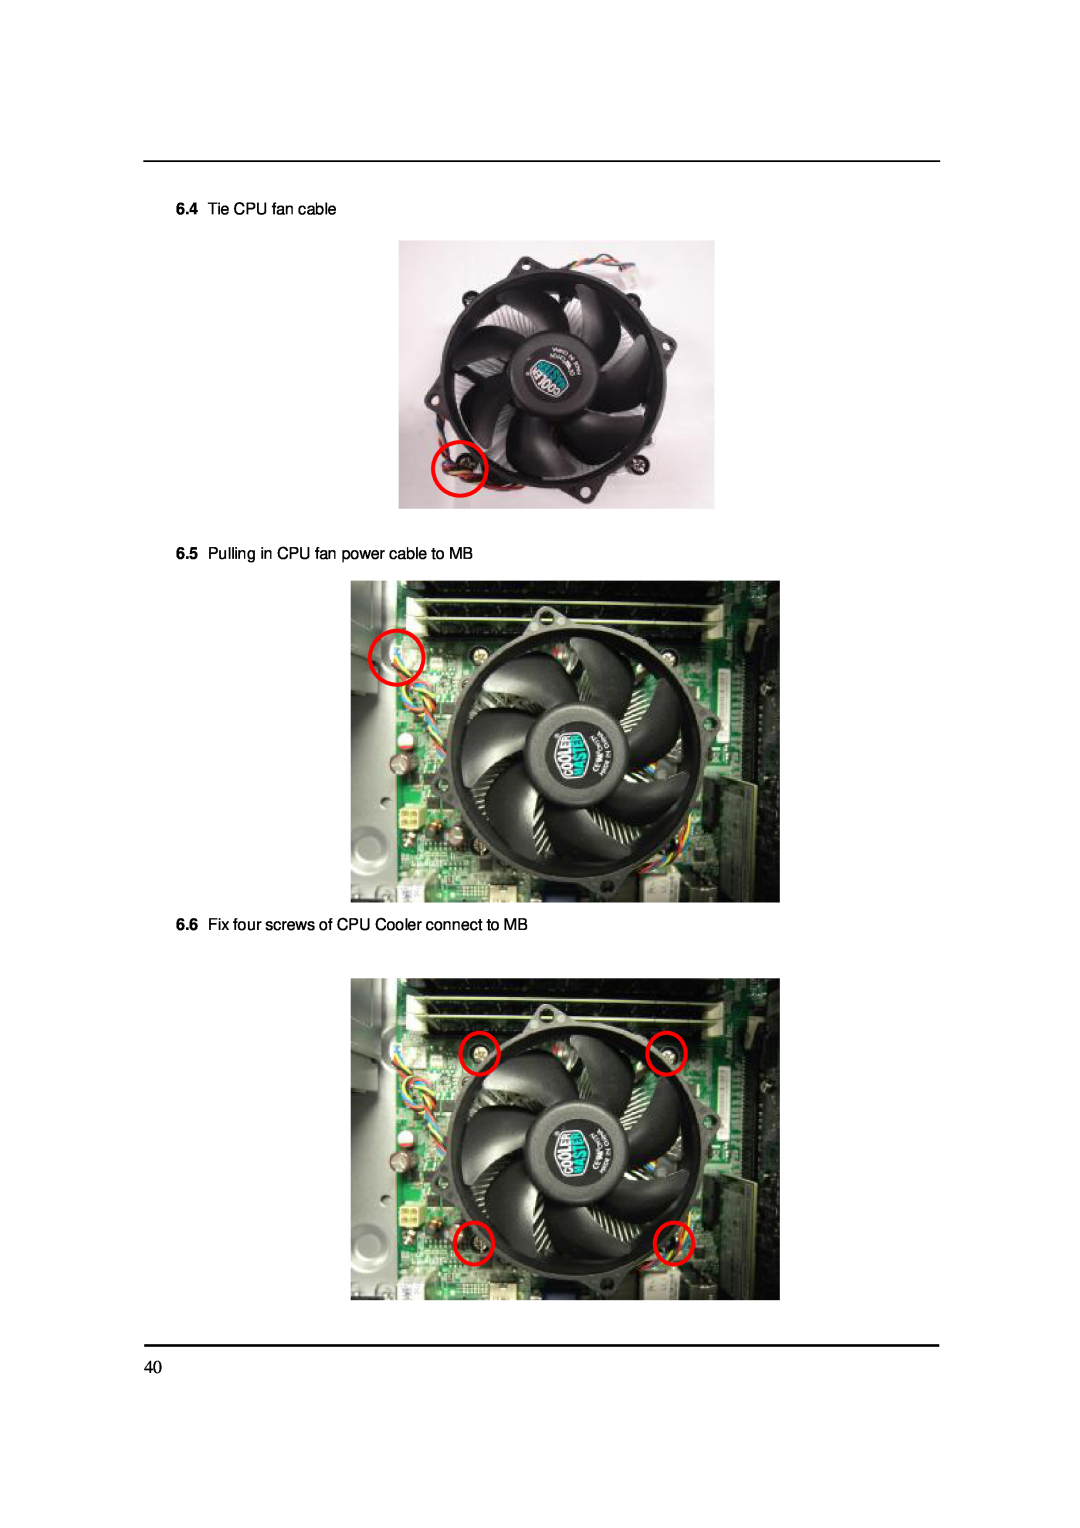 Acer S3811 manual Tie CPU fan cable 6.5 Pulling in CPU fan power cable to MB, Fix four screws of CPU Cooler connect to MB 